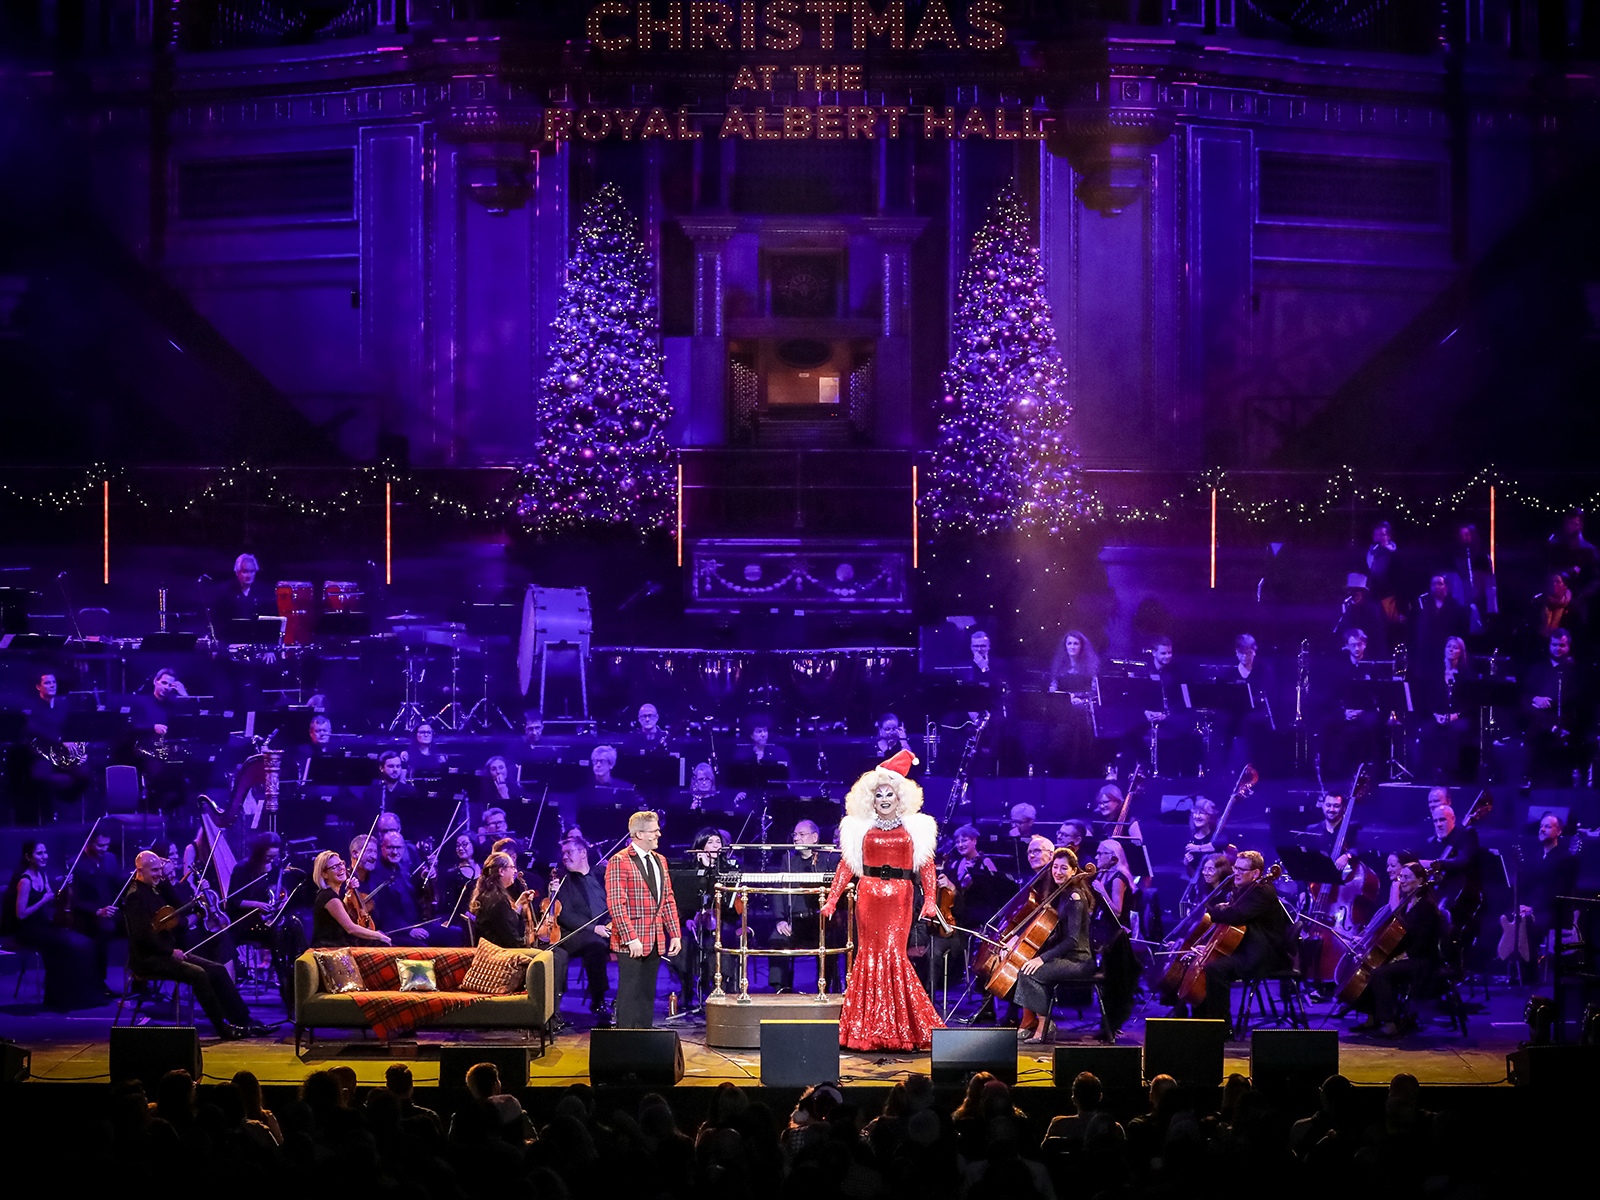 A Christmas Gaiety photo from the show